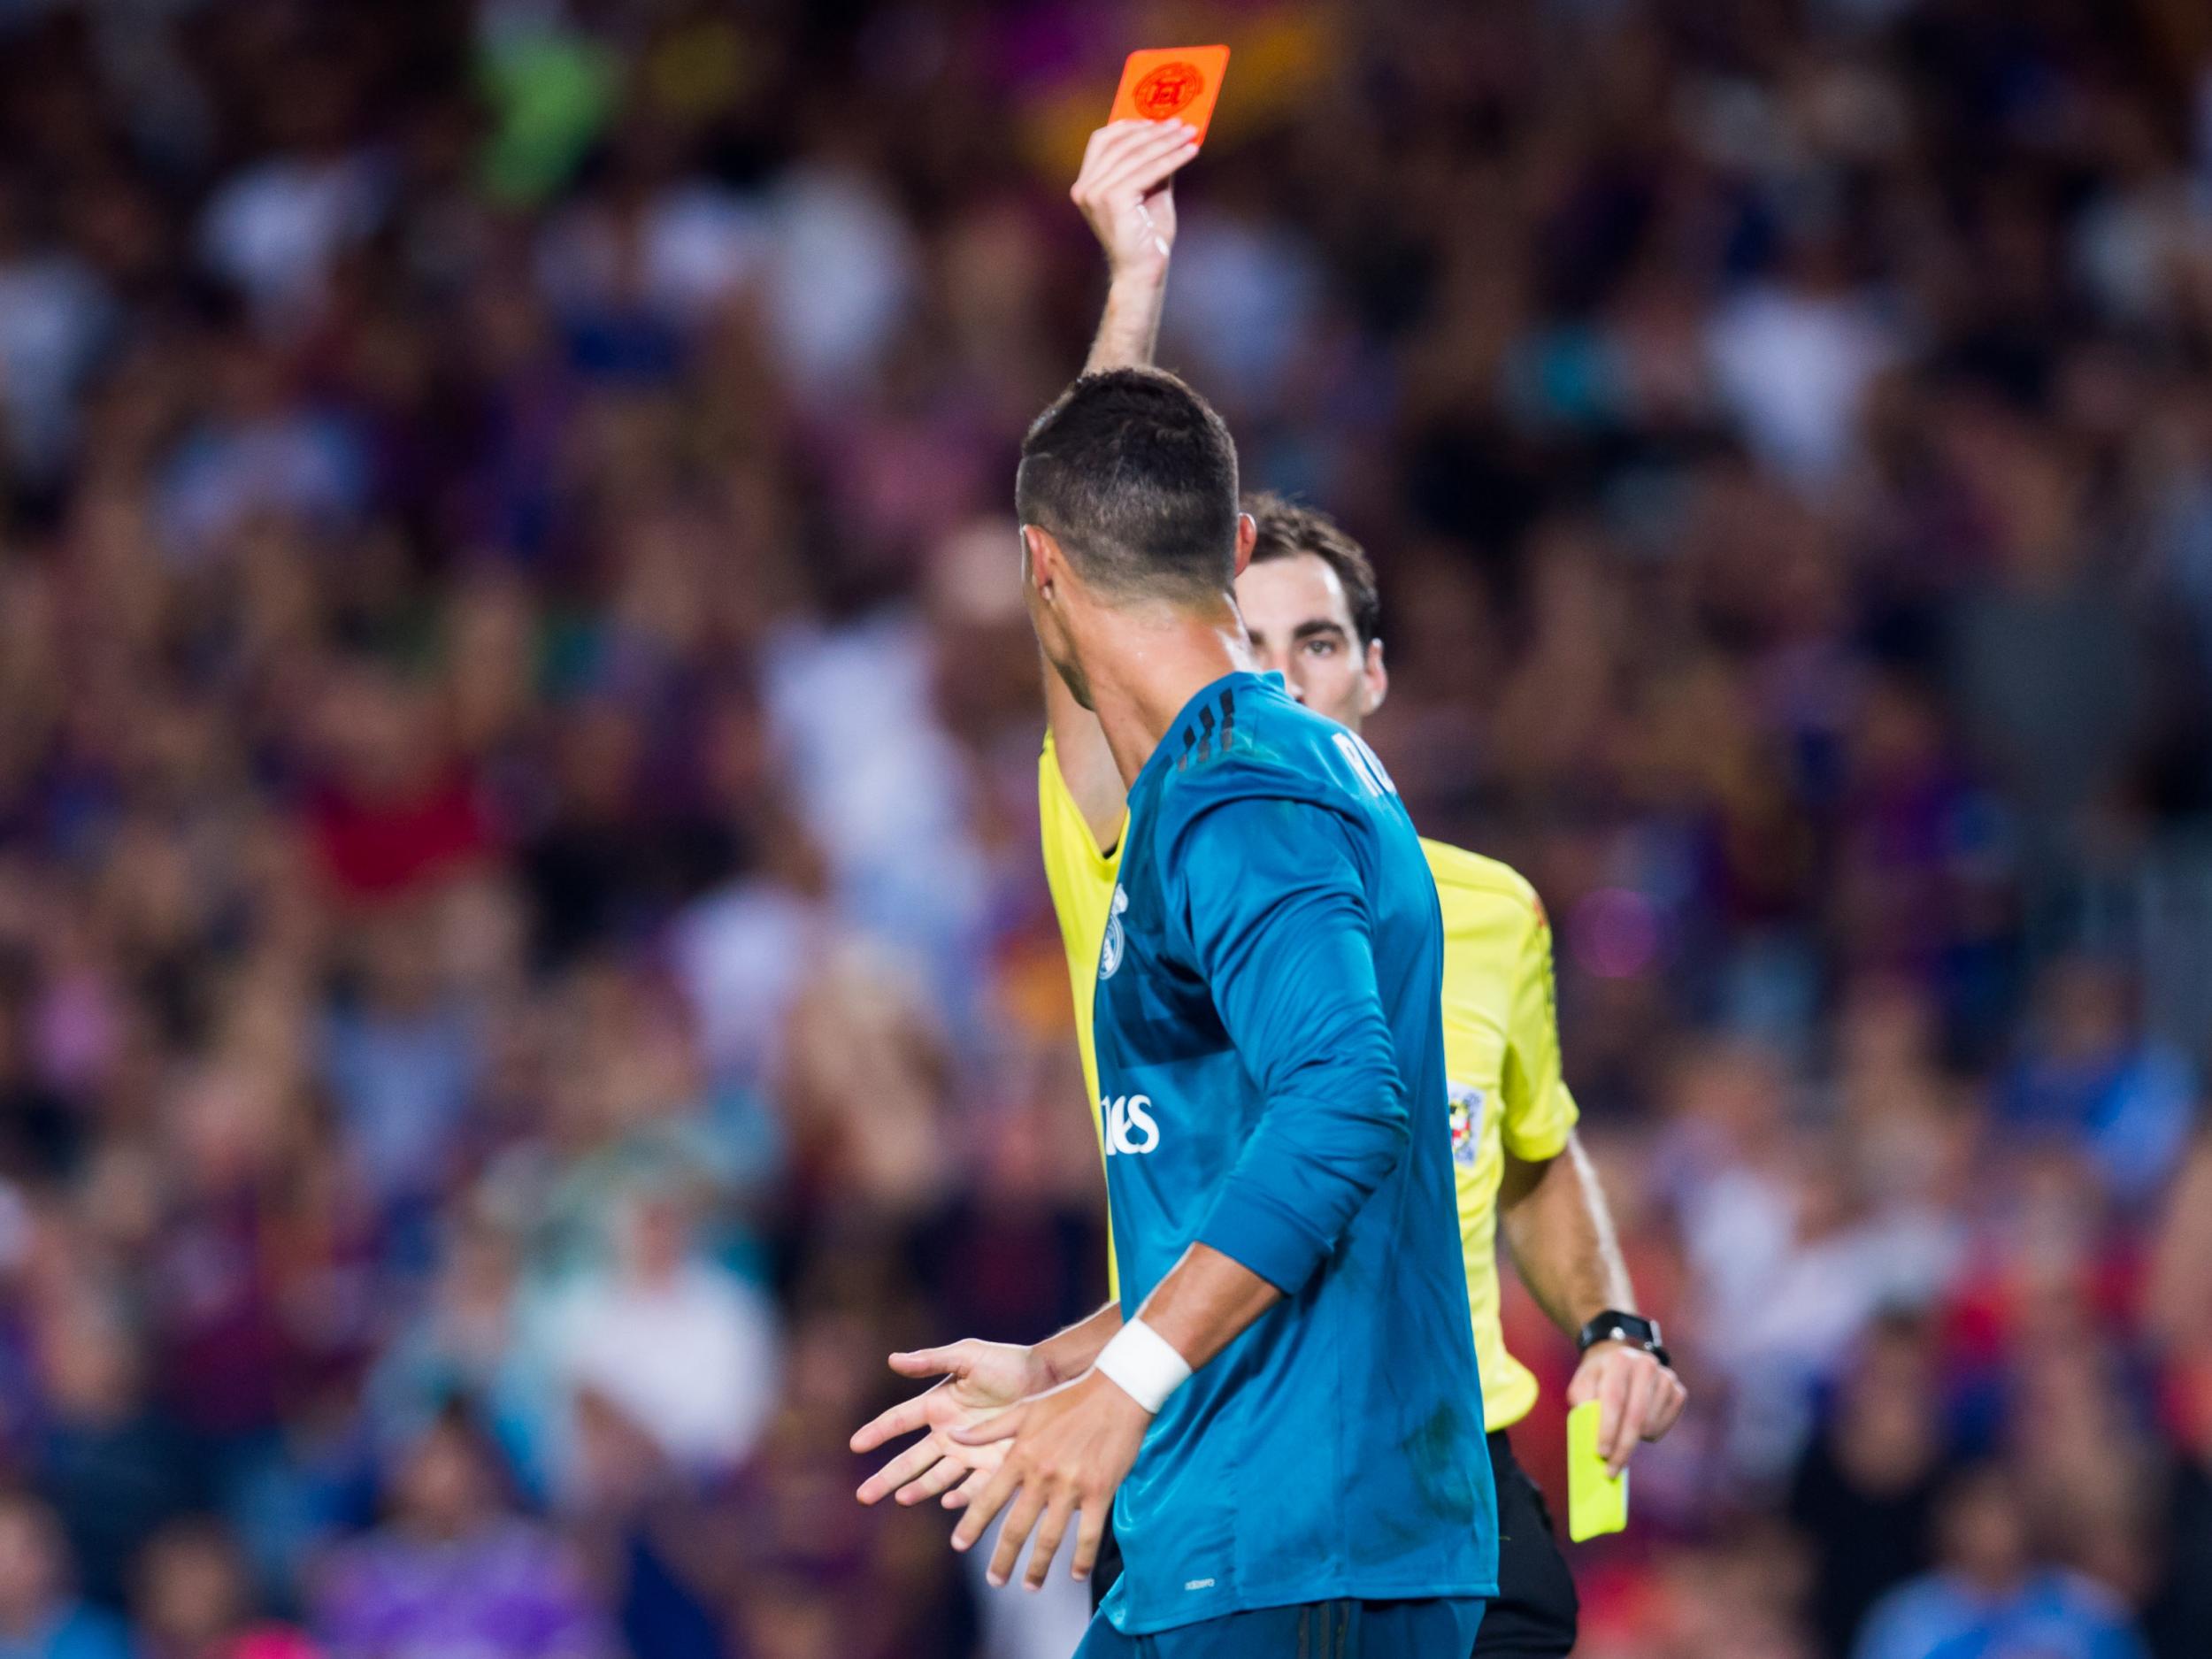 Cristiano Ronaldo is set to miss Real Madrid's Super Copa second leg against Barcelona on Wednesday night